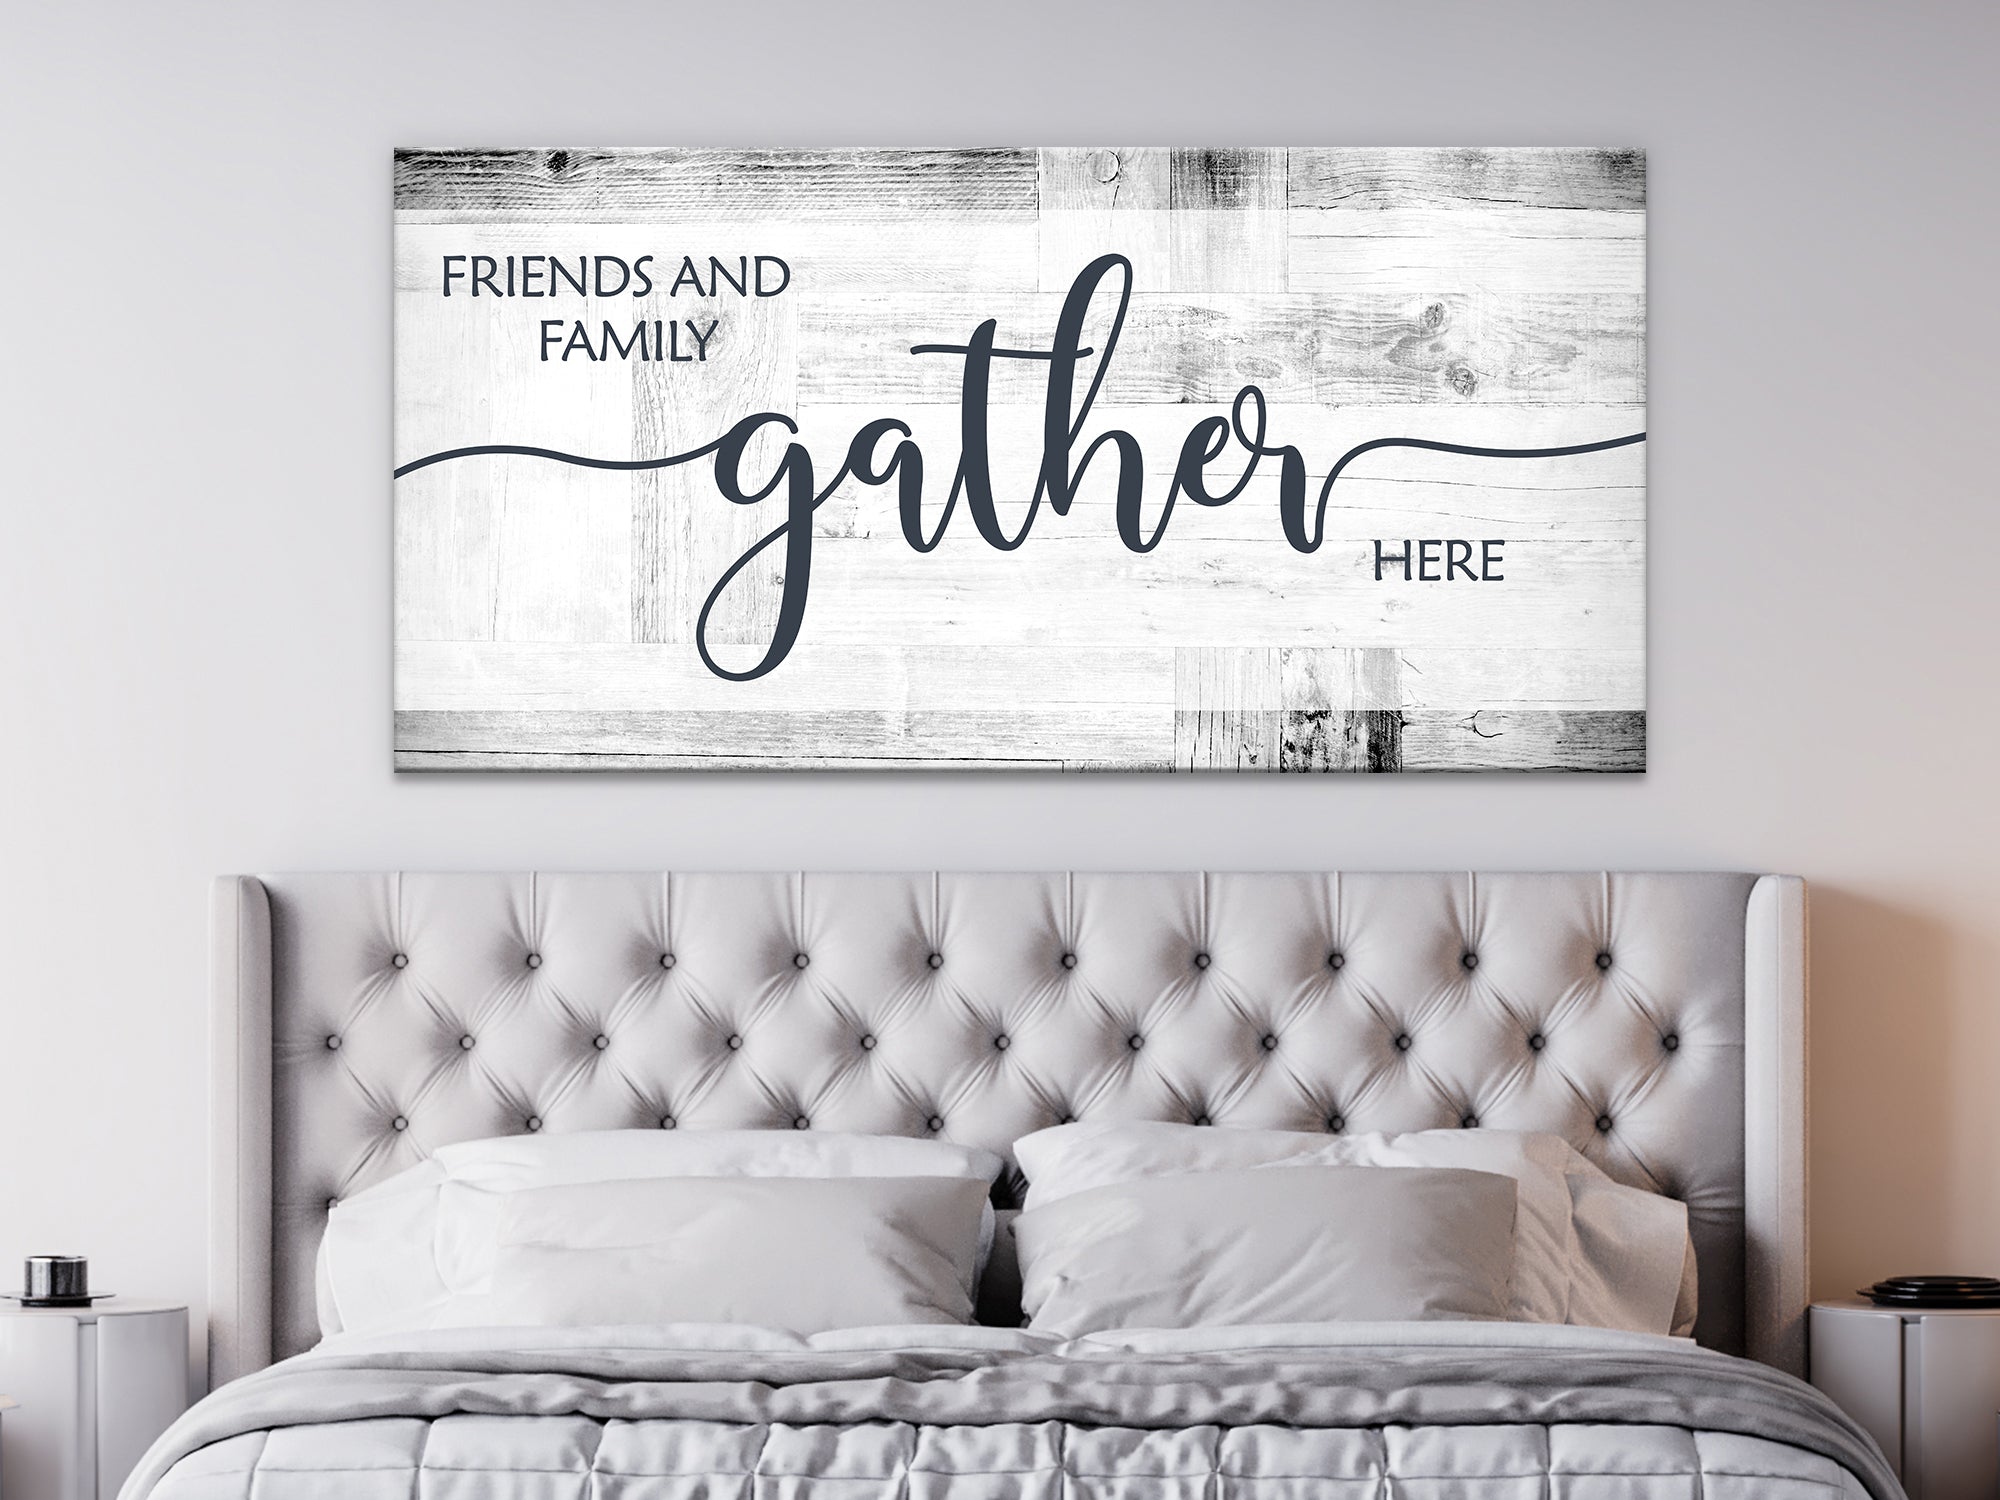 Friends and Family Gather Here - Dinning Room Canvas Wall Art